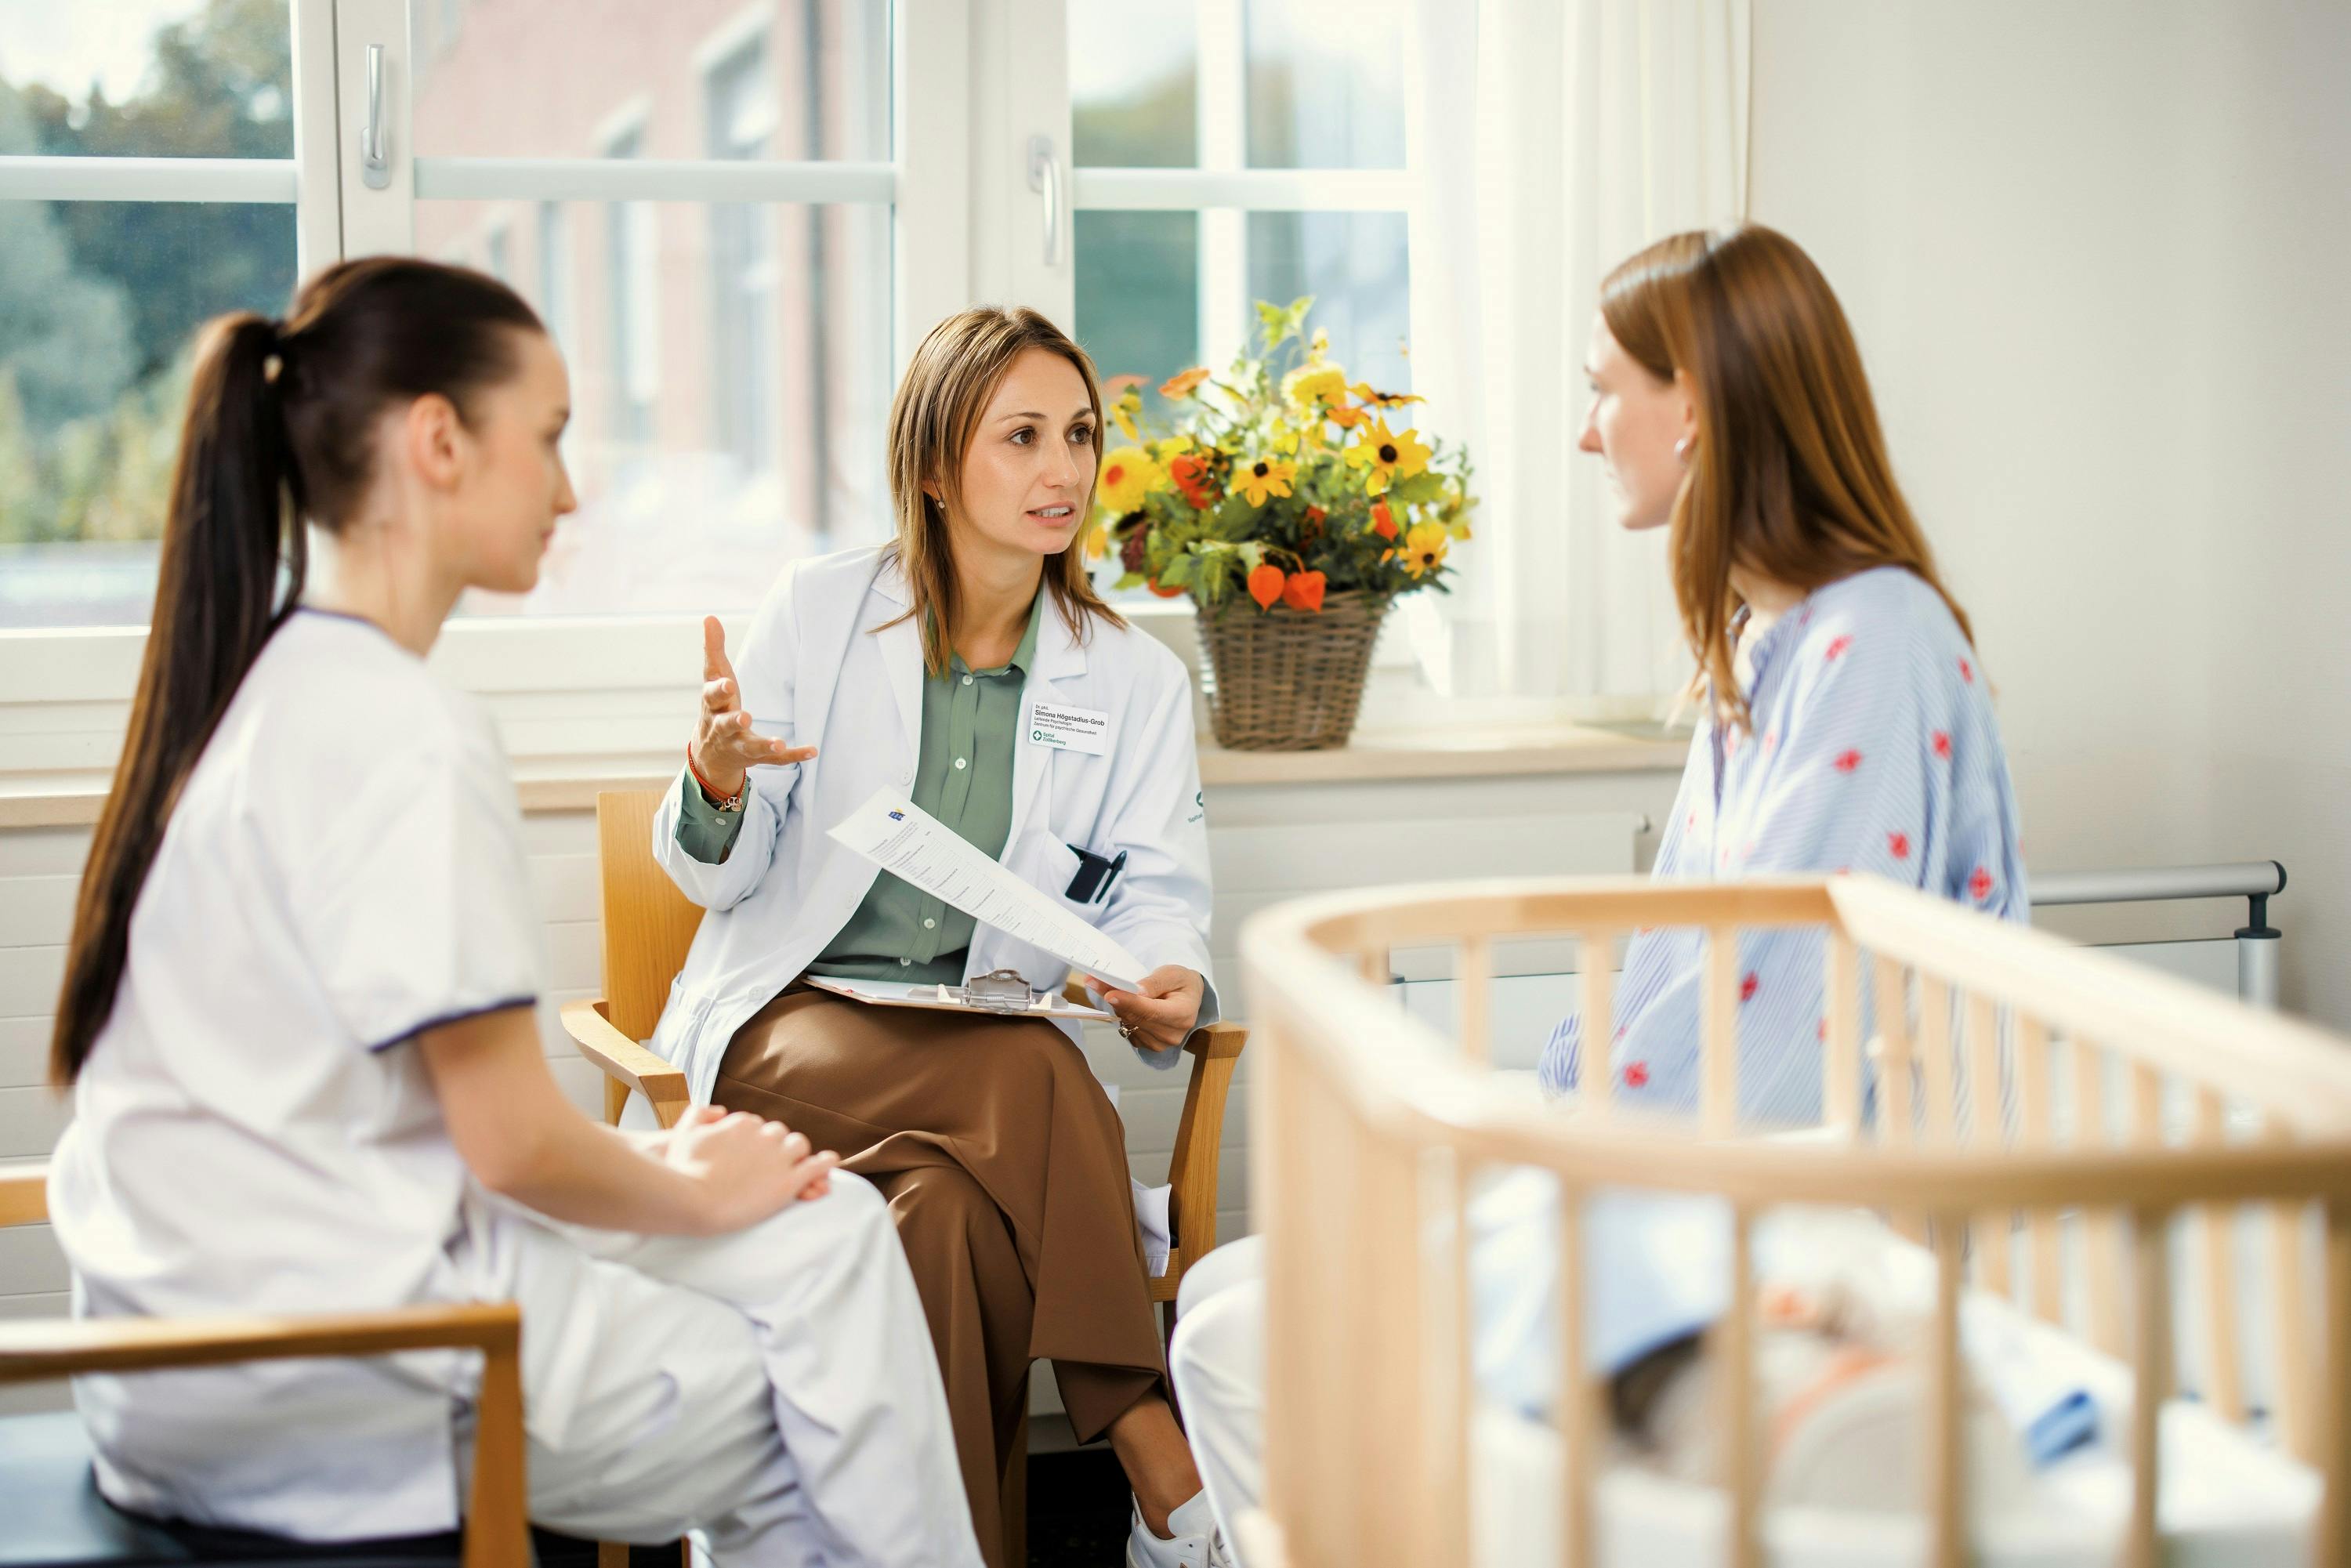 Doctor talking to patient and nurse in a hospital room.